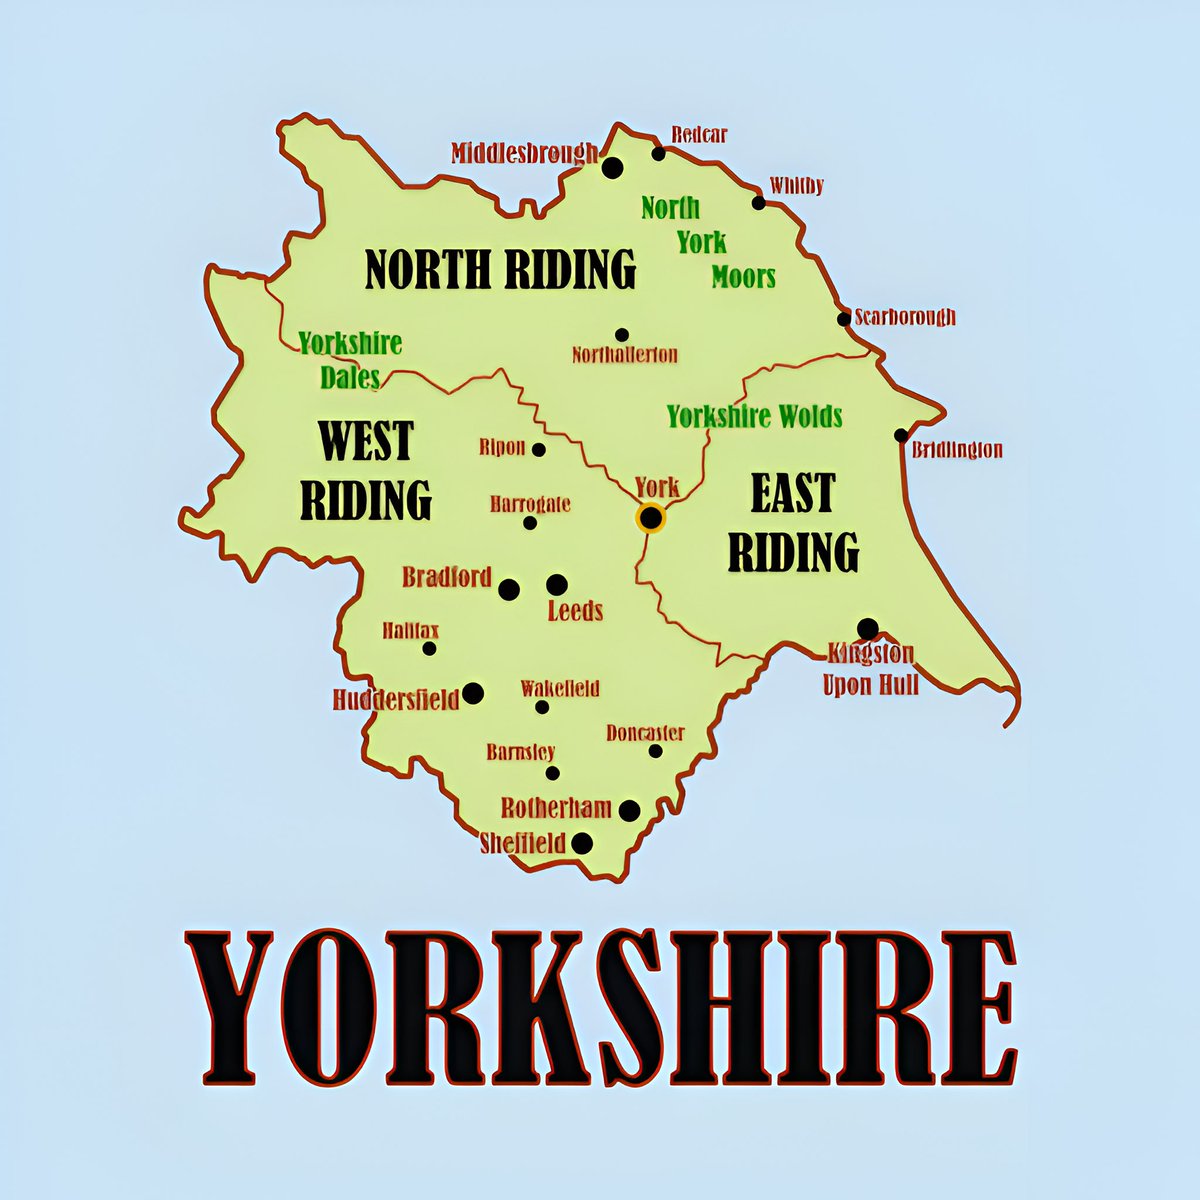 The #WestRiding of Yorkshire consists of a largely urban south and a rural north. Some of the loveliest of the #Yorkshire Dales are in the West Riding, including Nidderdale and Wharfedale. The West Riding stretches out as far as Sedbergh. 🇬🇧 #HistoricCounties | #CountyDays 🏴󠁧󠁢󠁥󠁮󠁧󠁿